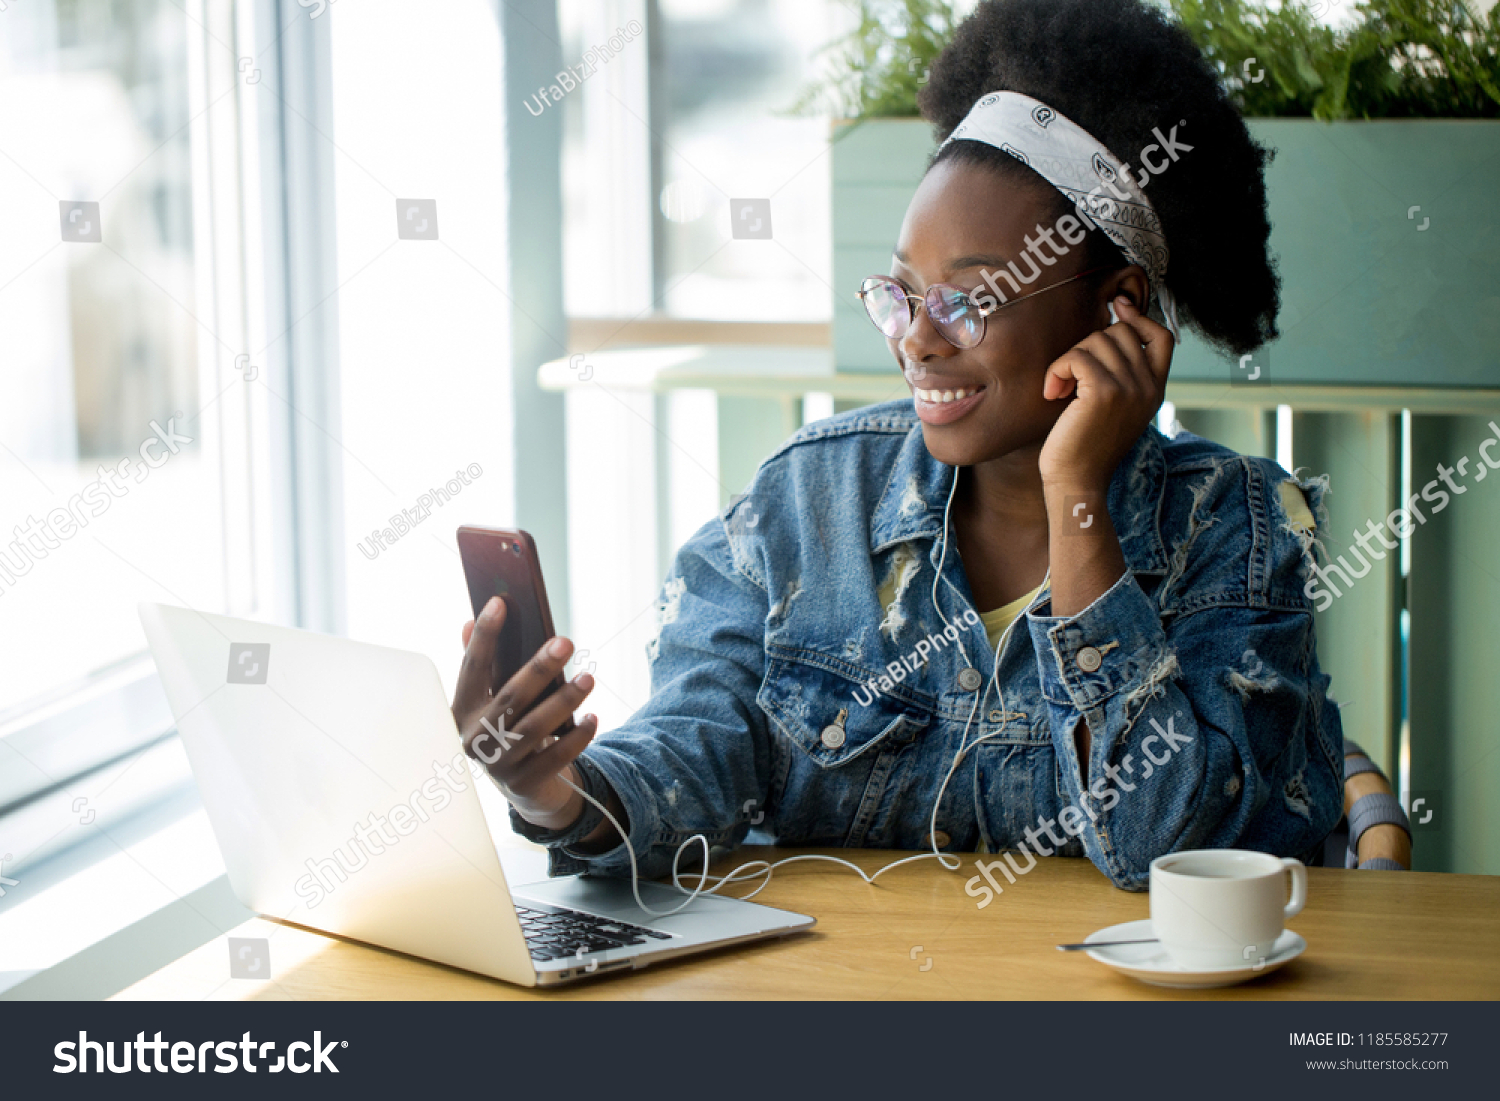 Young african customer client female in spectacles and jeans outfit beaming with joy, spending free time shopping online while sitting in cafe. #1185585277